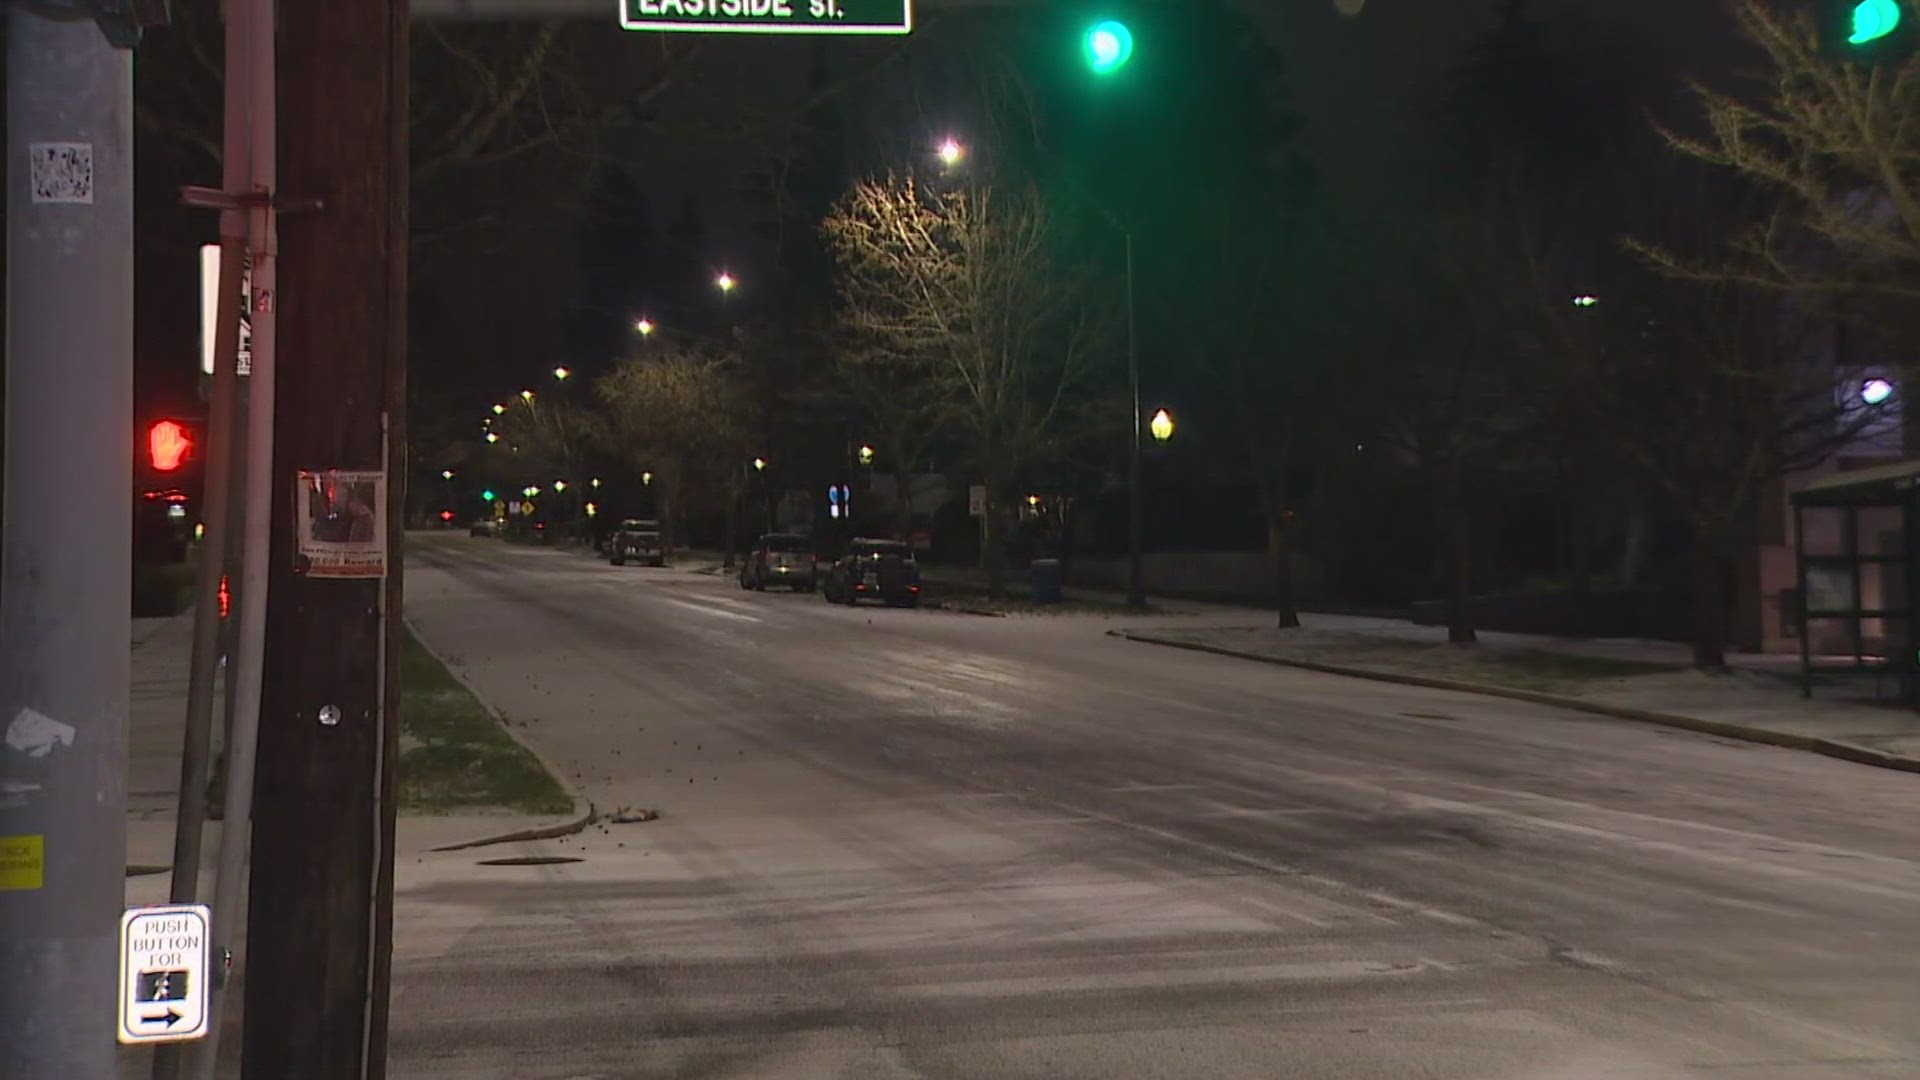 Residents in the south sound woke up to a slight dusting of snow, but no significant accumulation